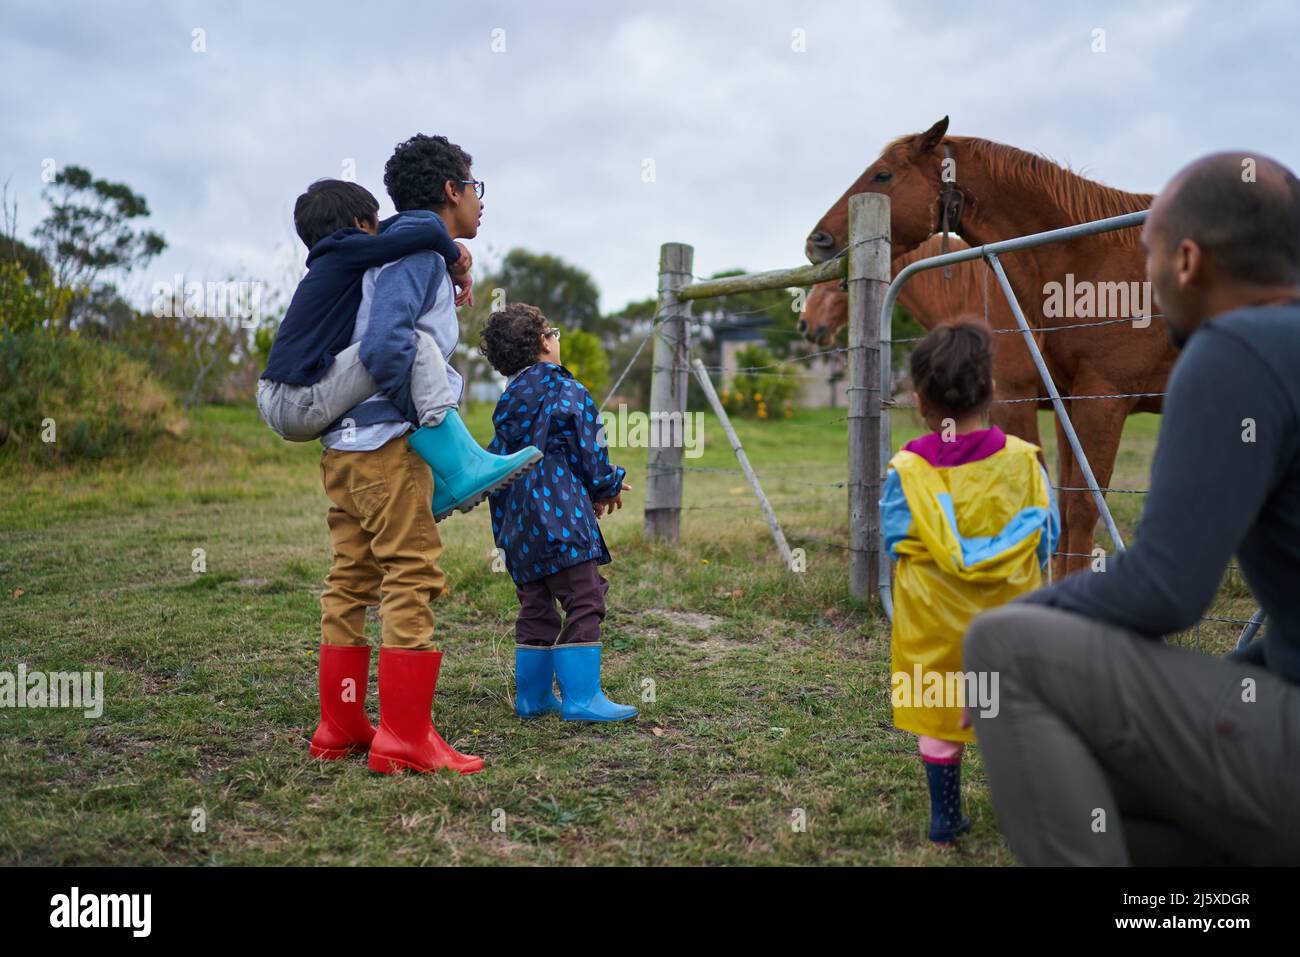 Curious kids watching horses at fence Stock Photo